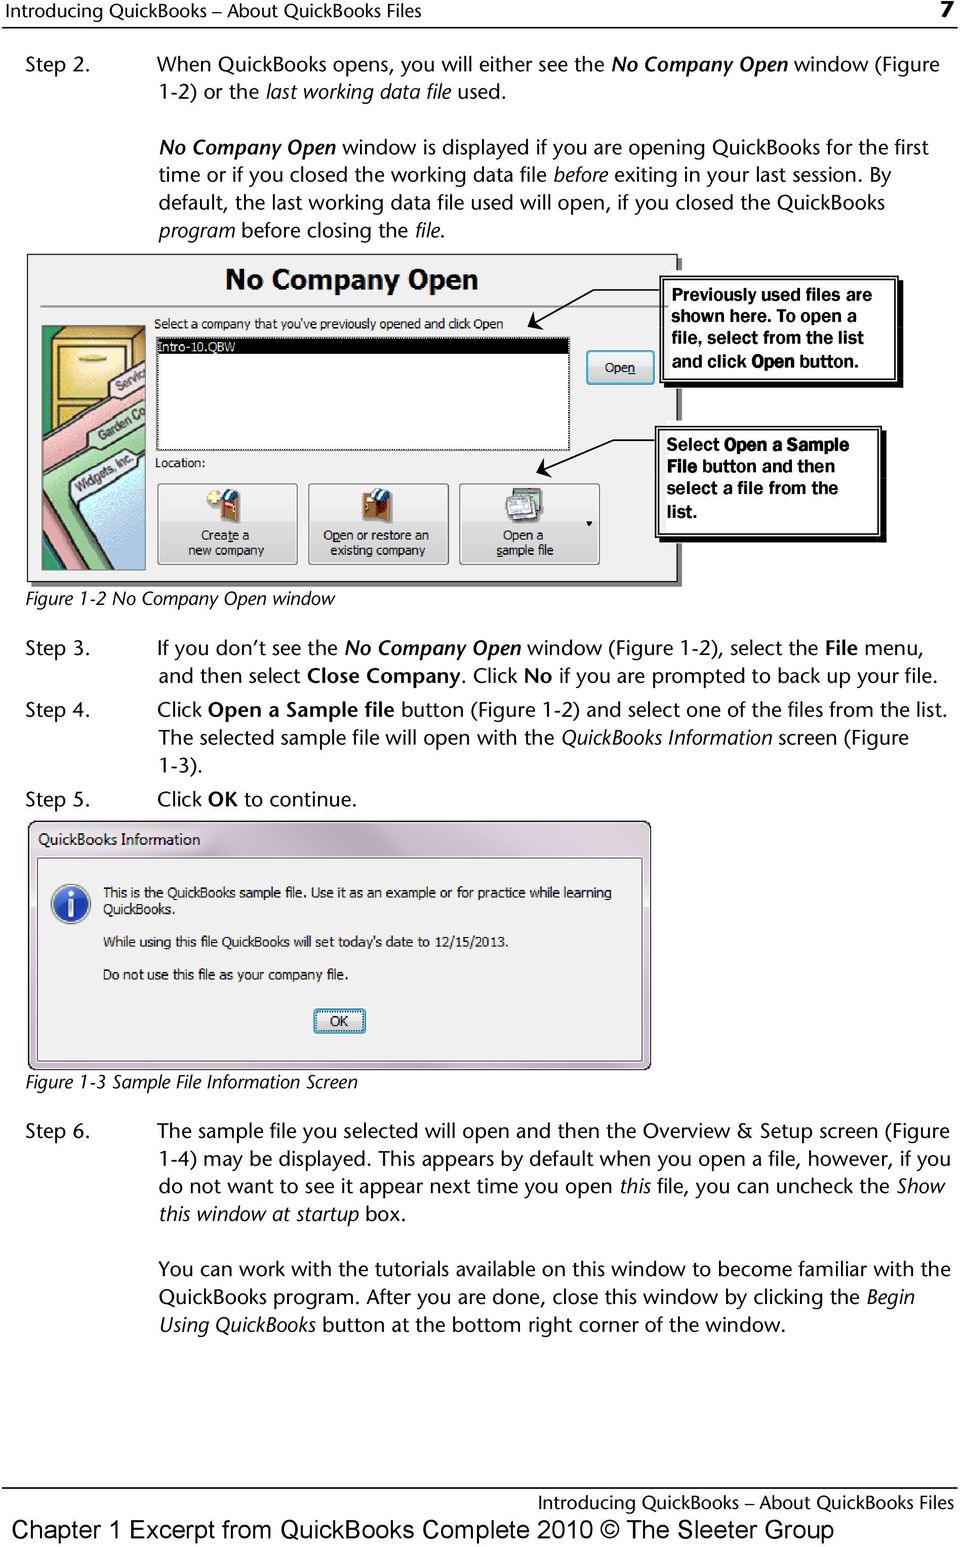 By default, the last working data file used will open, if you closed the QuickBooks program before closing the file. Previously used files are shown here.